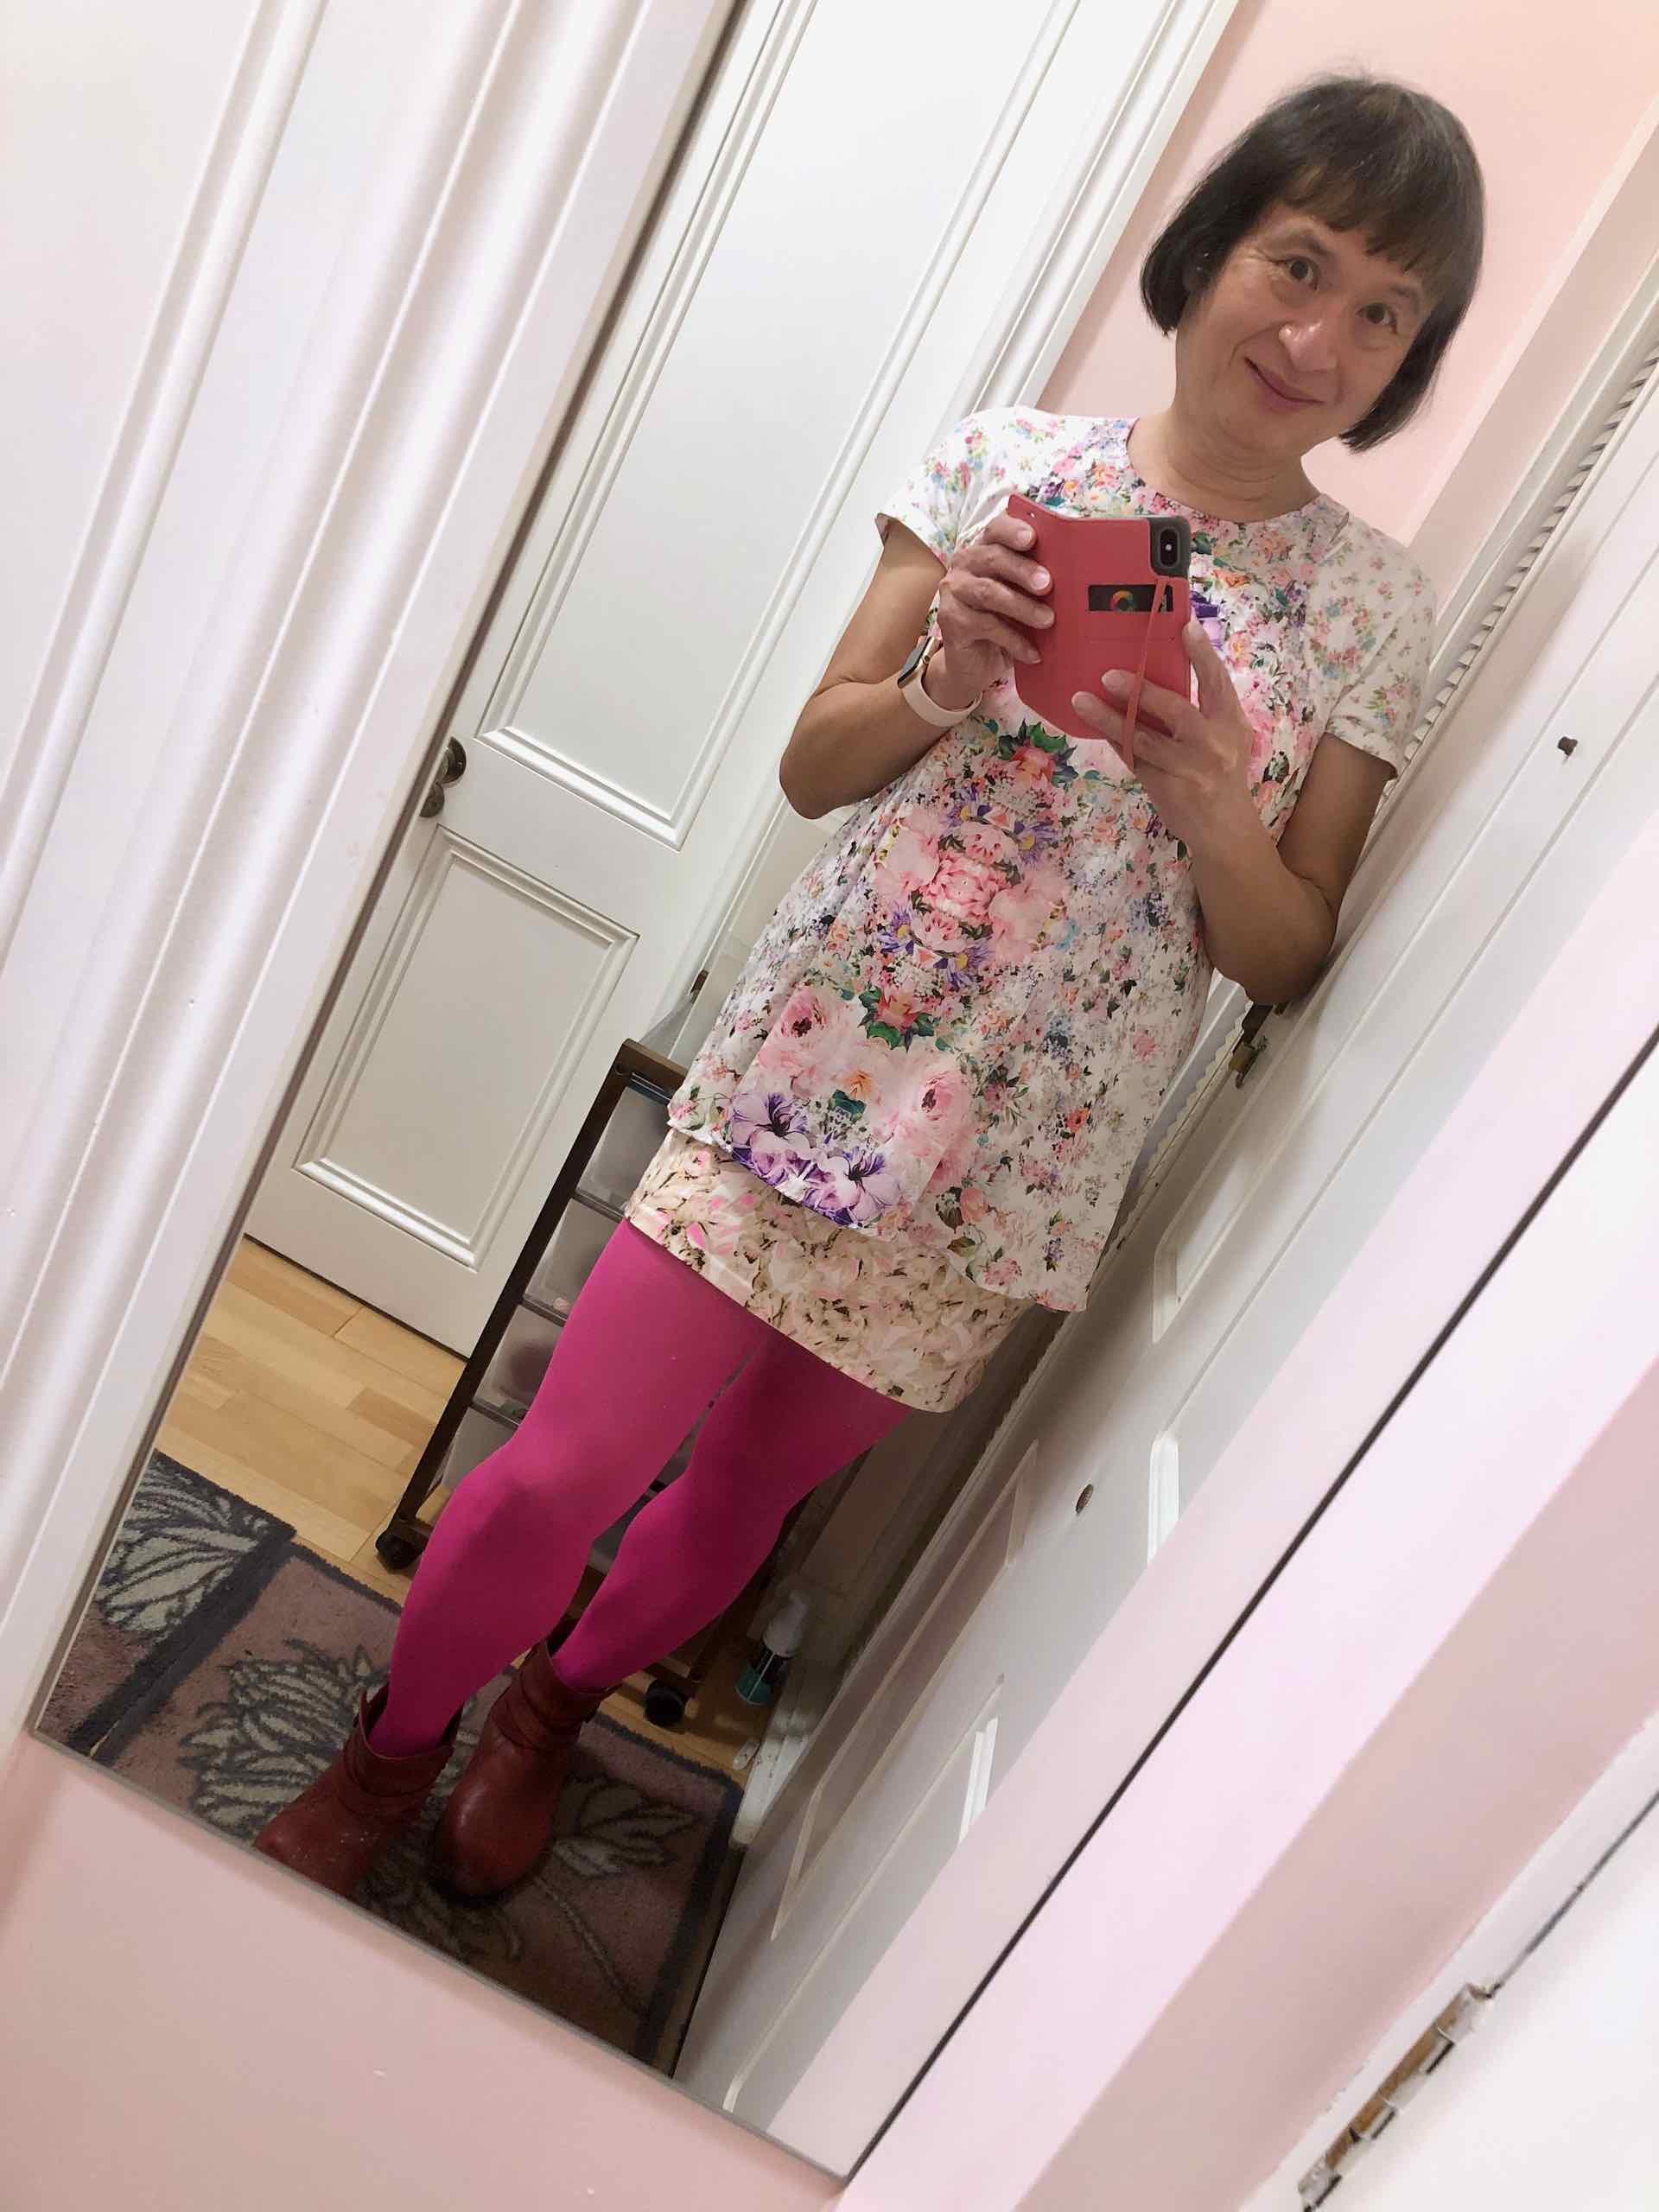 Flower patterned outfit featured image